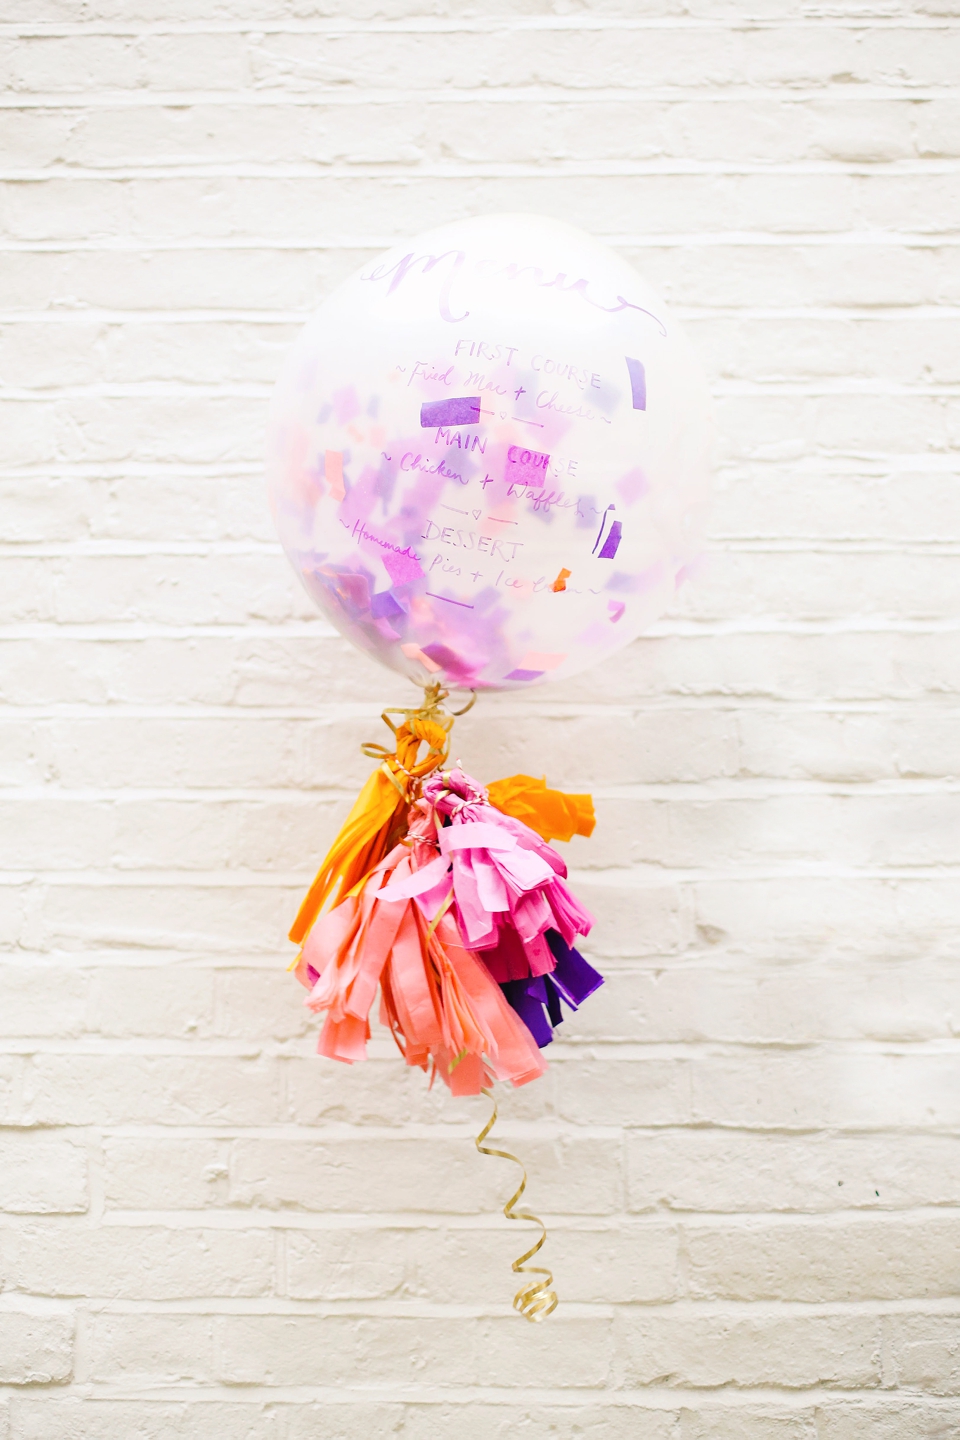 DIY Wedding Balloons With Tassels DIY project by Berinmade